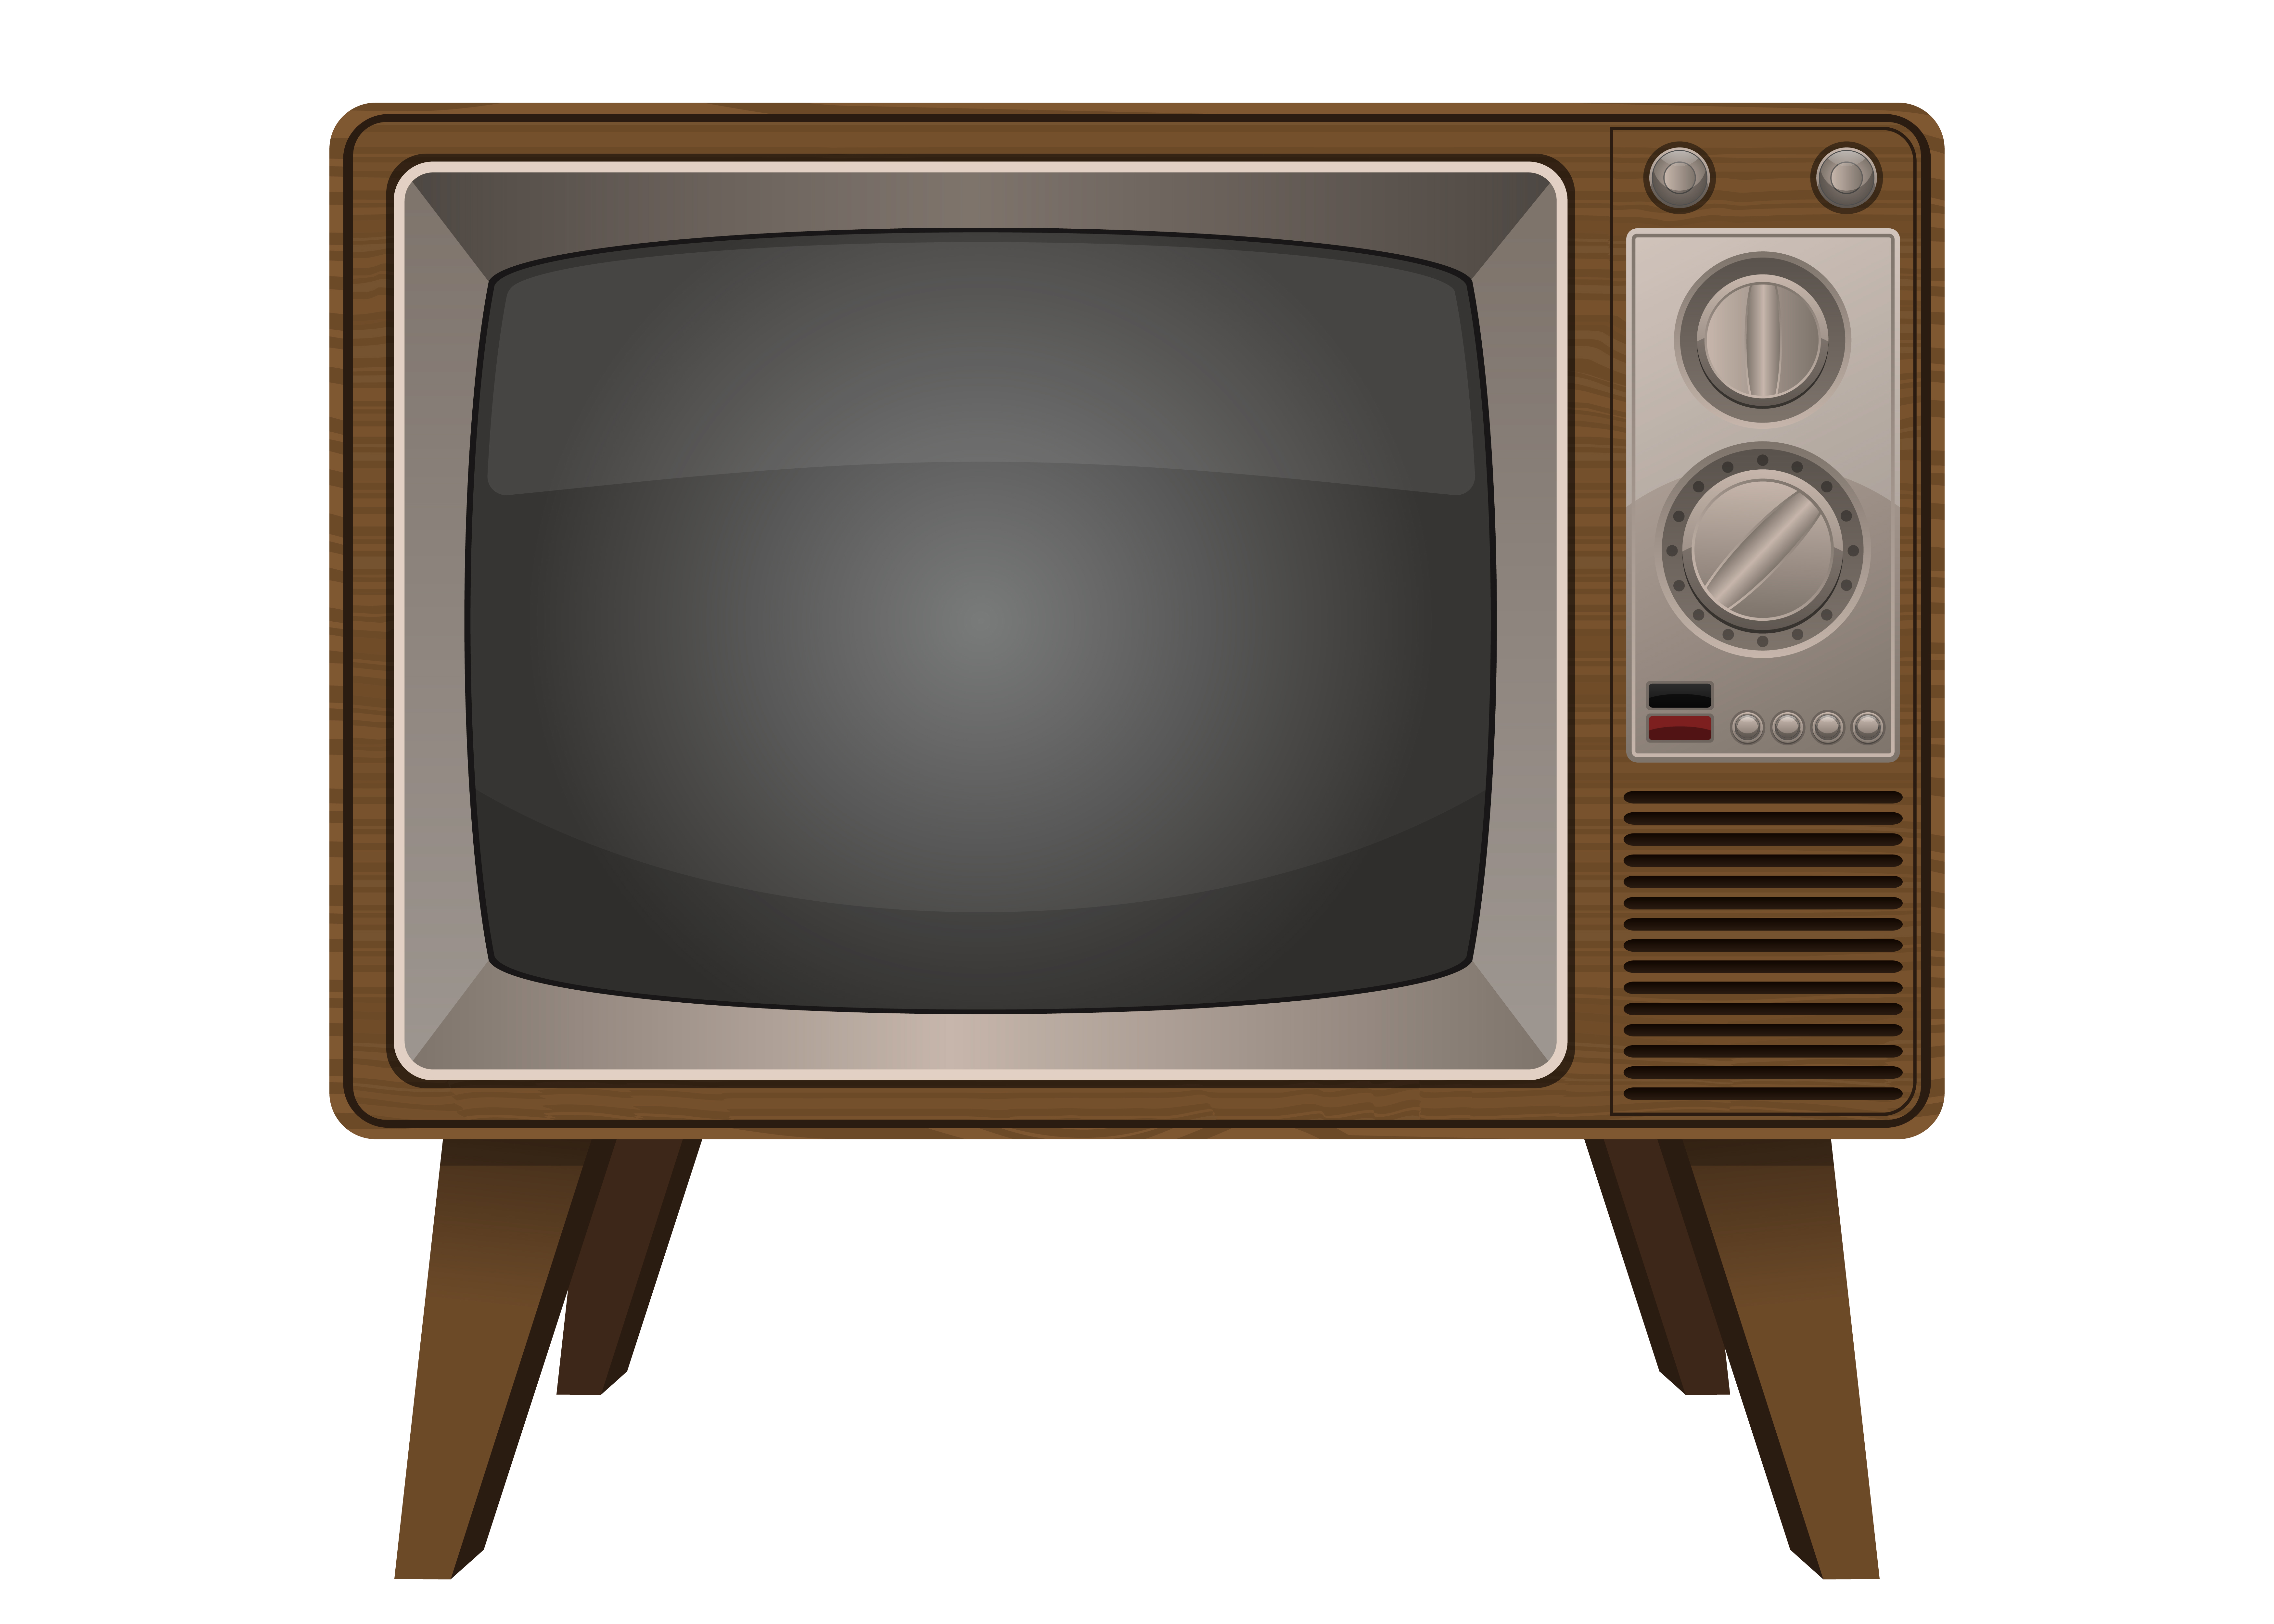 Blue 3d Tv On A White Background With An Analog Design, Vintage Tv